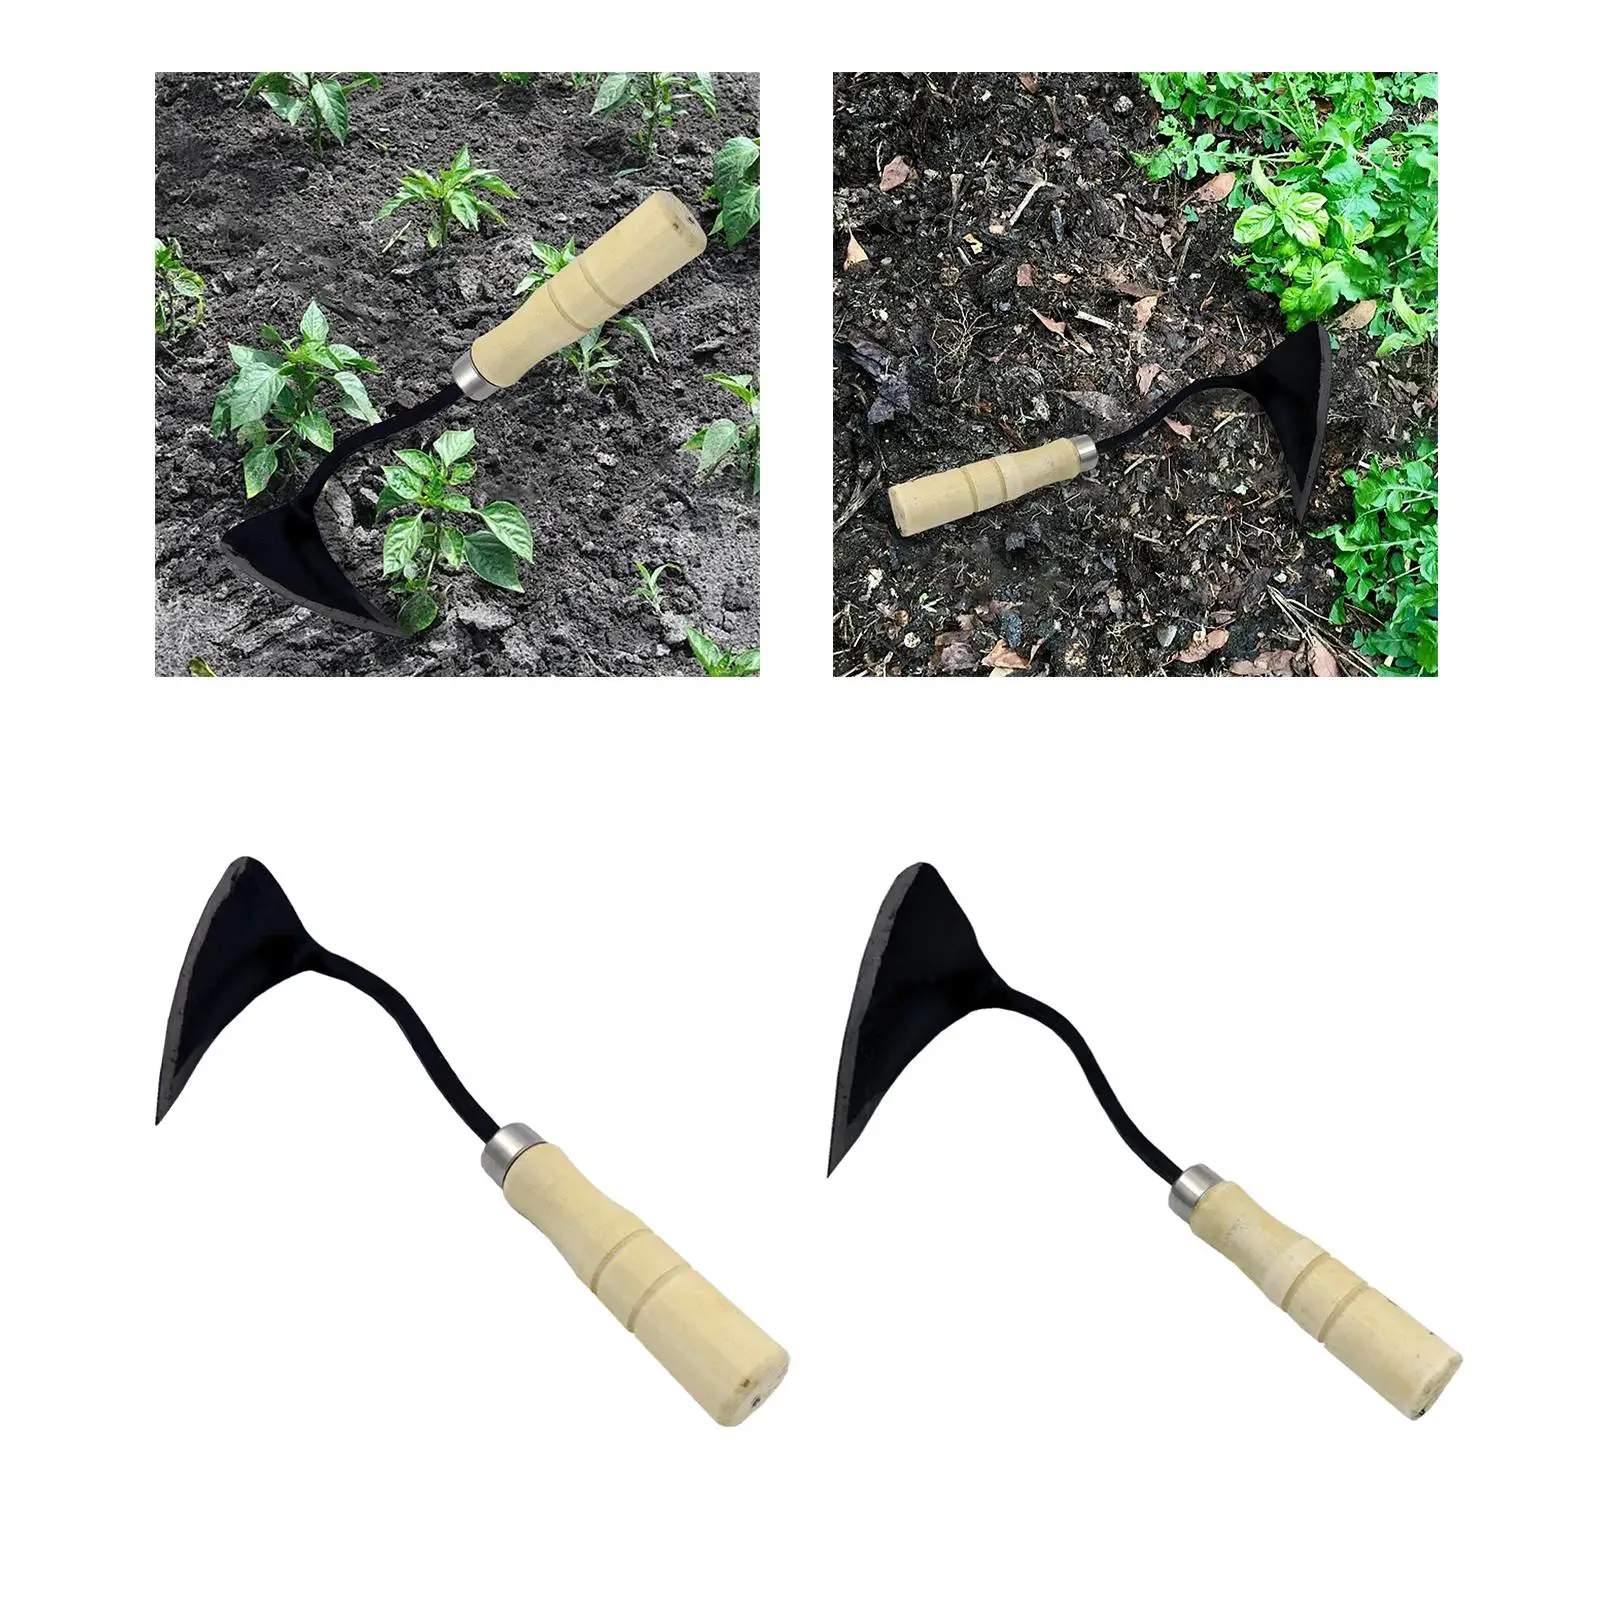 Plow Hoe Puller Farming Tool Easy Digging Save Labor Potato Digger Tools for Kids and Adults Garden Lawn Yard Flowers